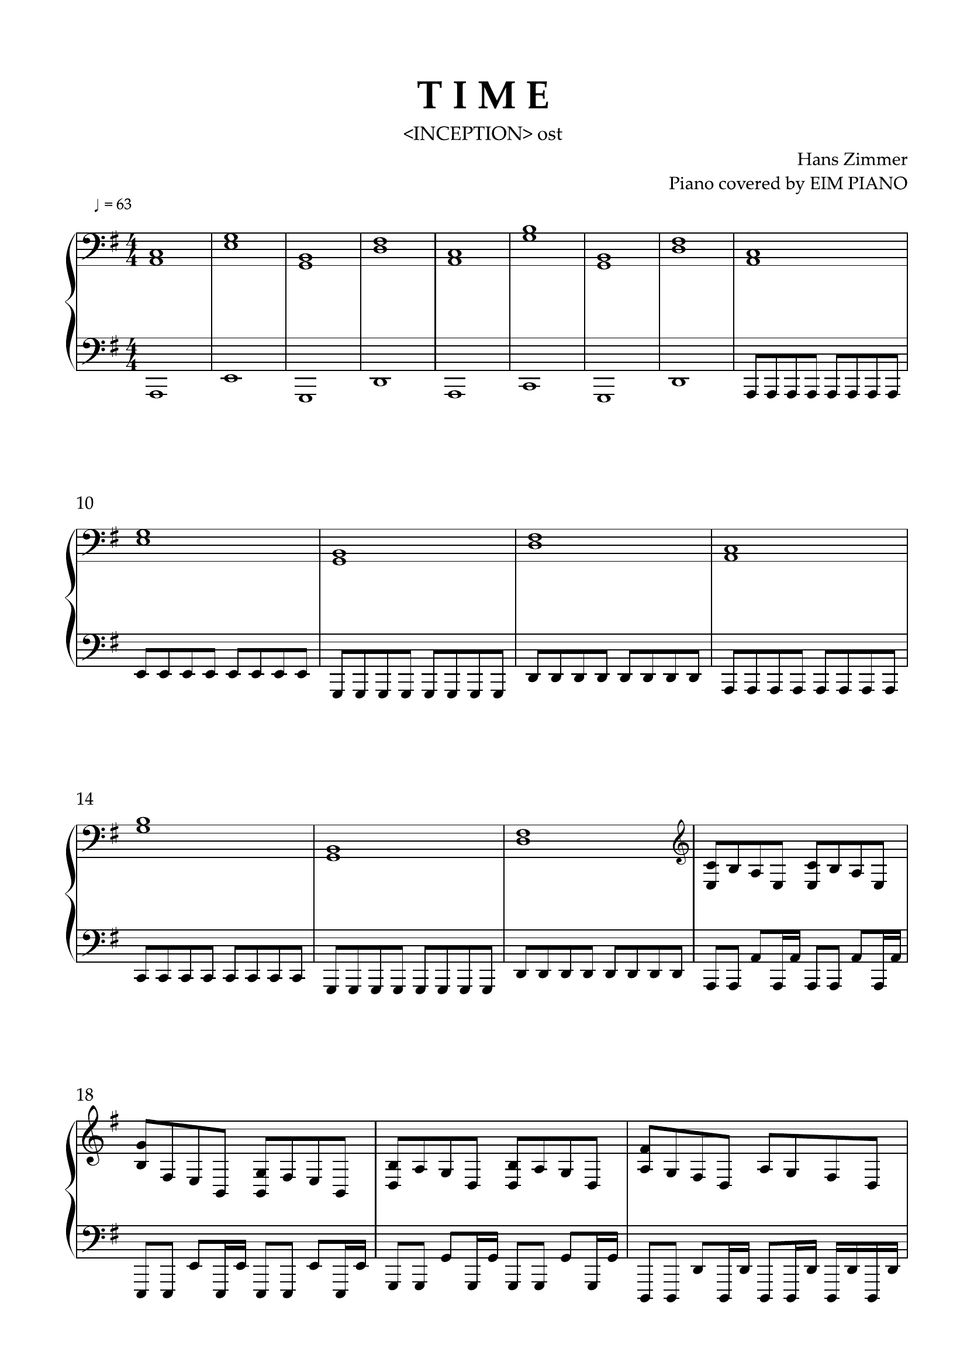 Hans Zimmer TIME(Inception OST) Sheets by EIM PIANO